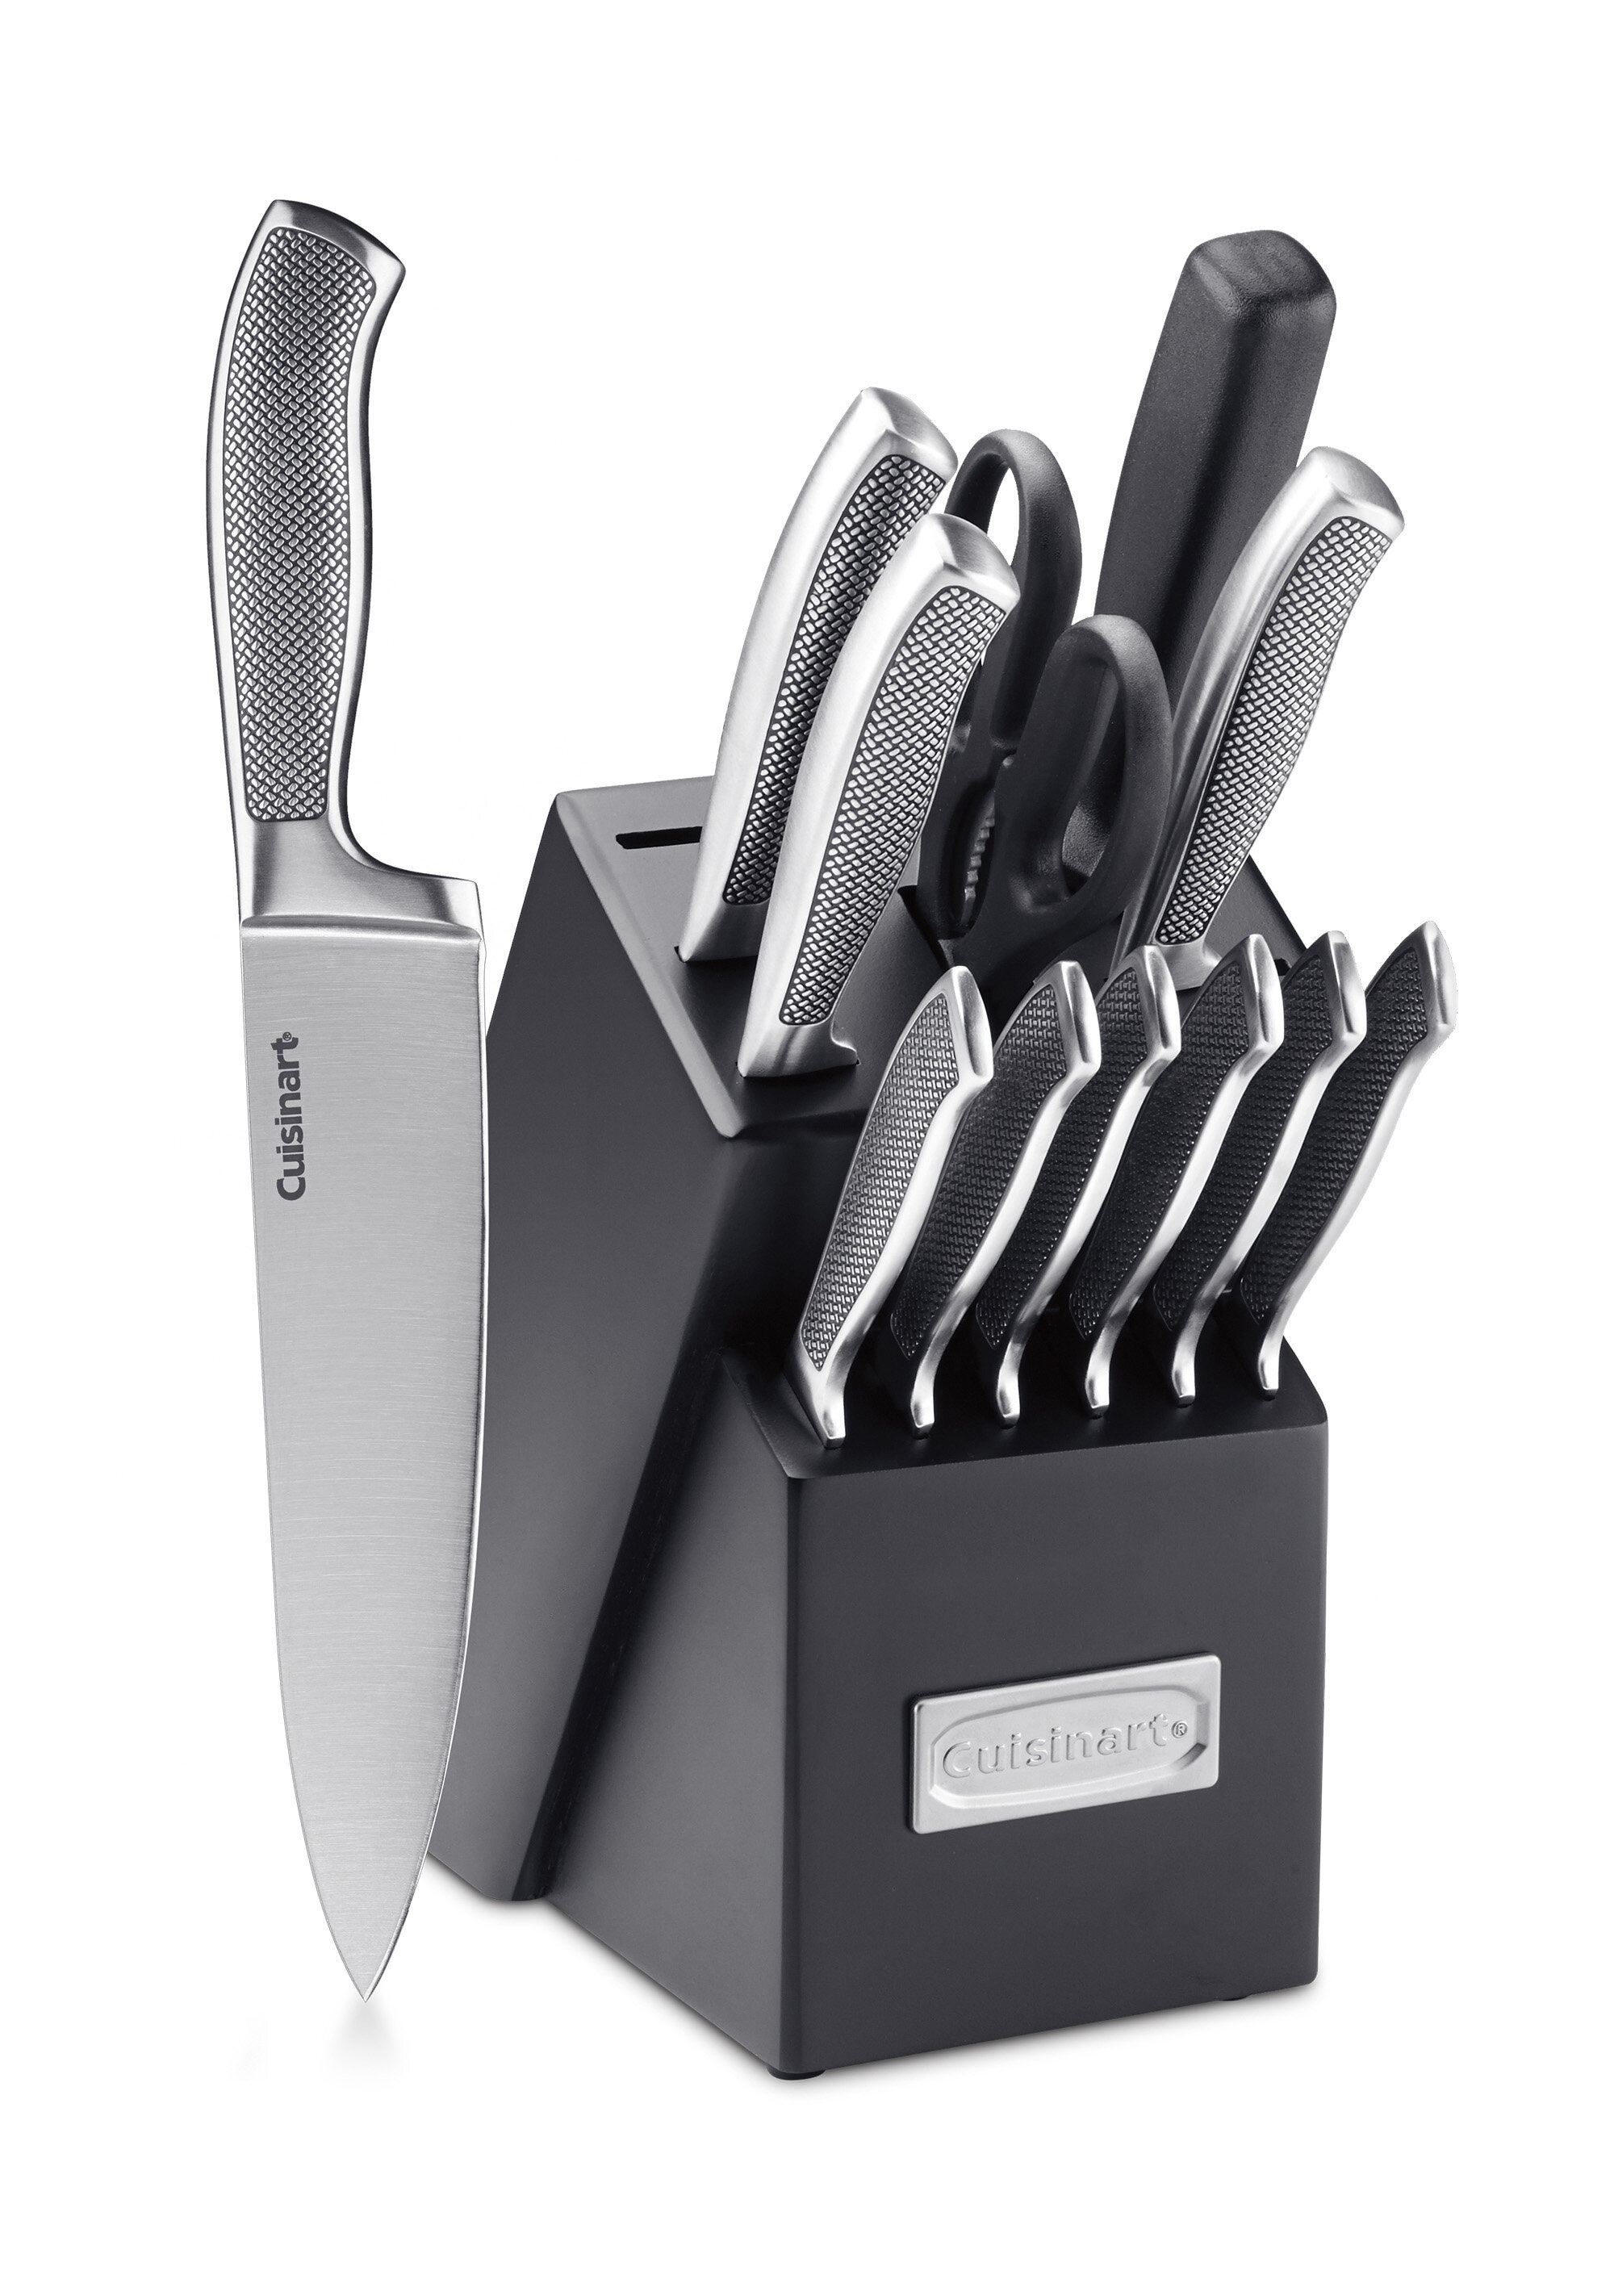 Cuisinart 6-piece Classic Knife Chef Set for sale online